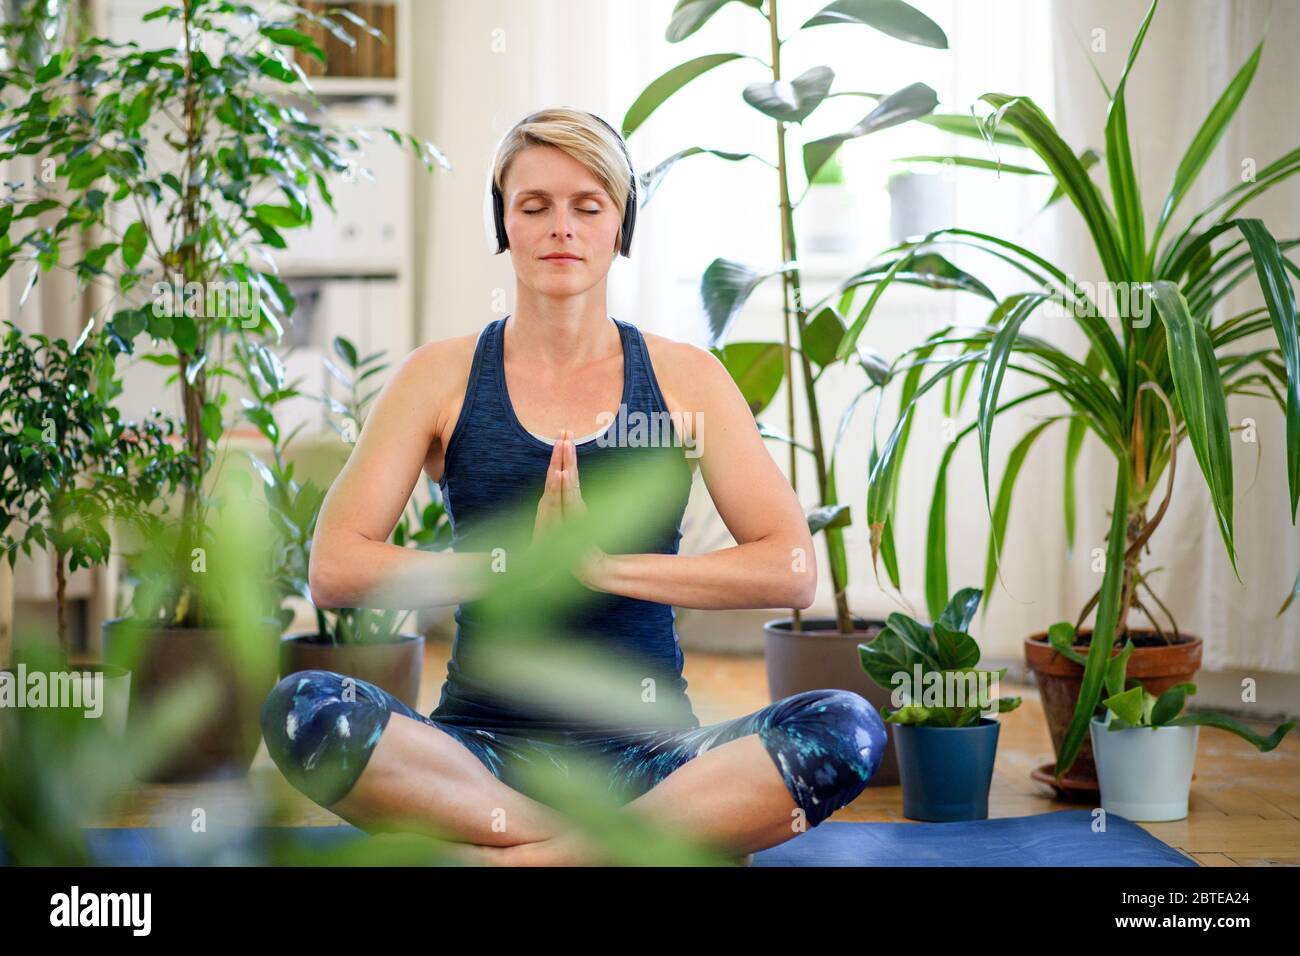 Front view of young woman indoors at home, doing yoga exercise. Stock Photo